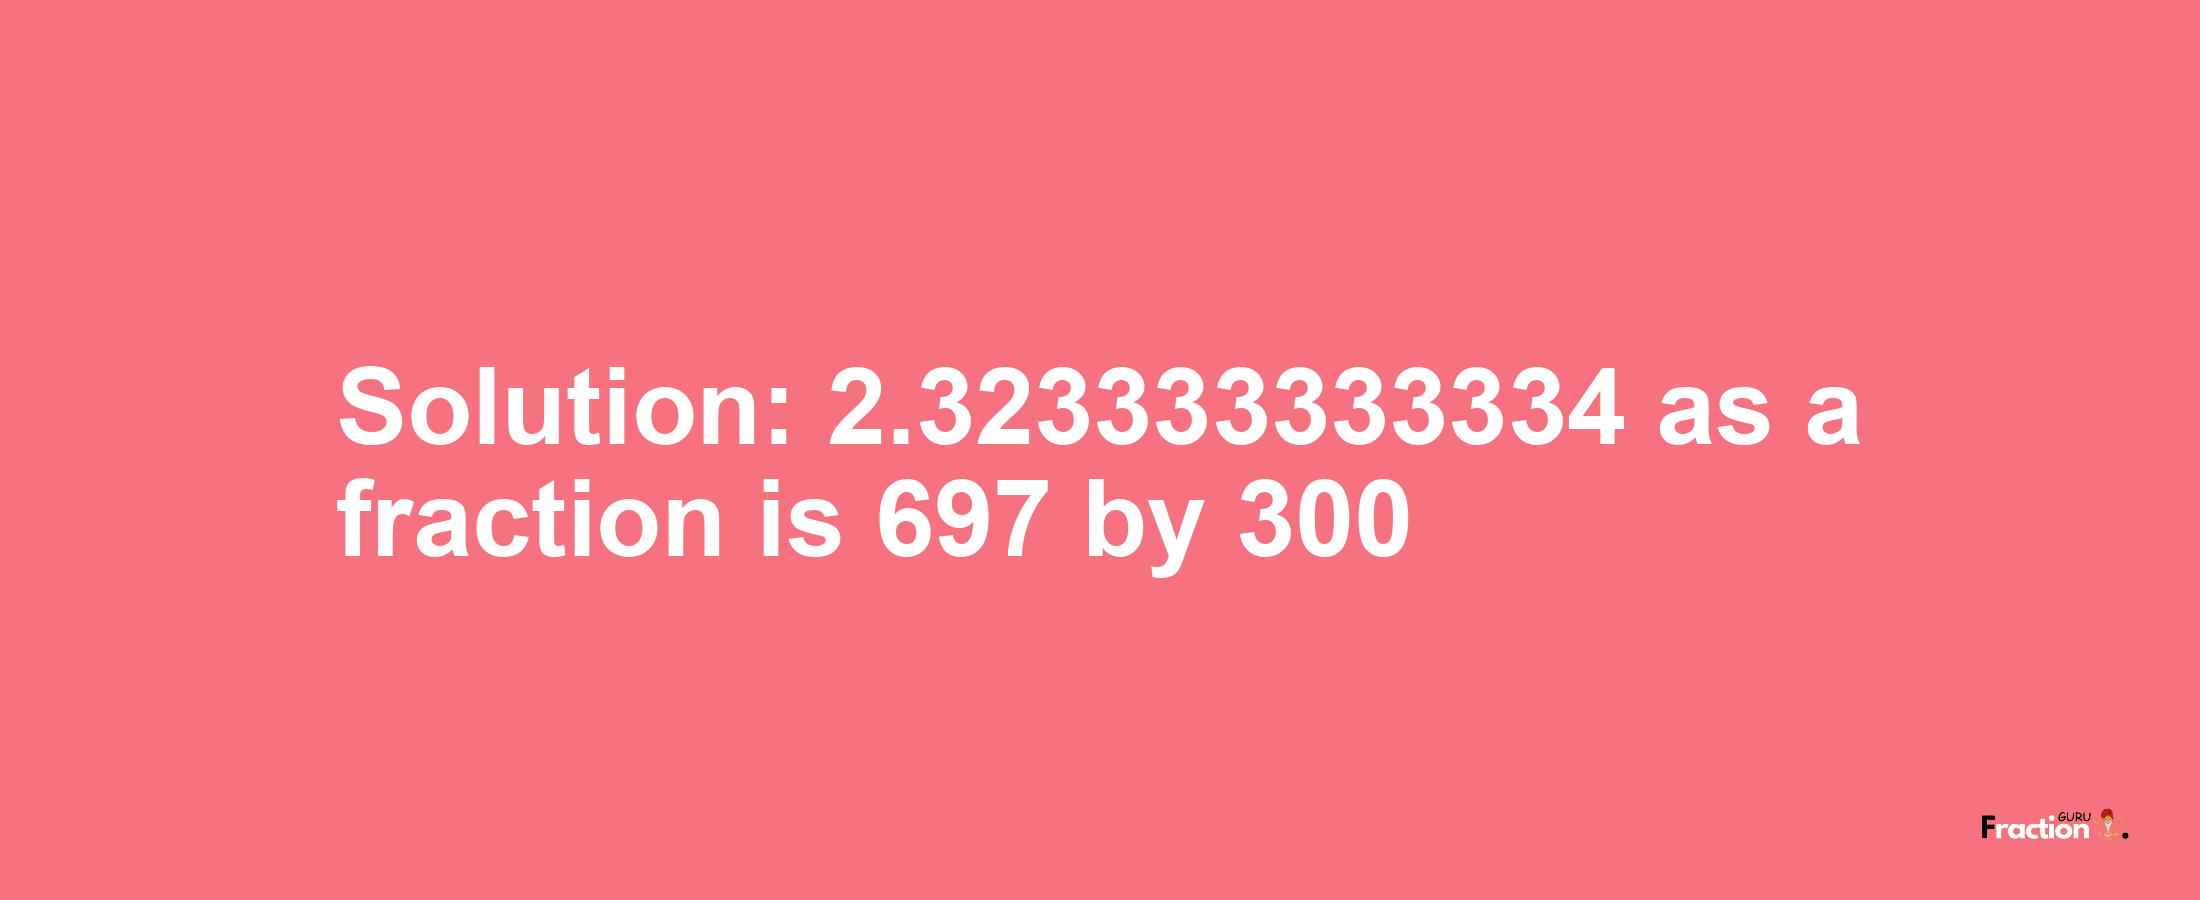 Solution:2.323333333334 as a fraction is 697/300